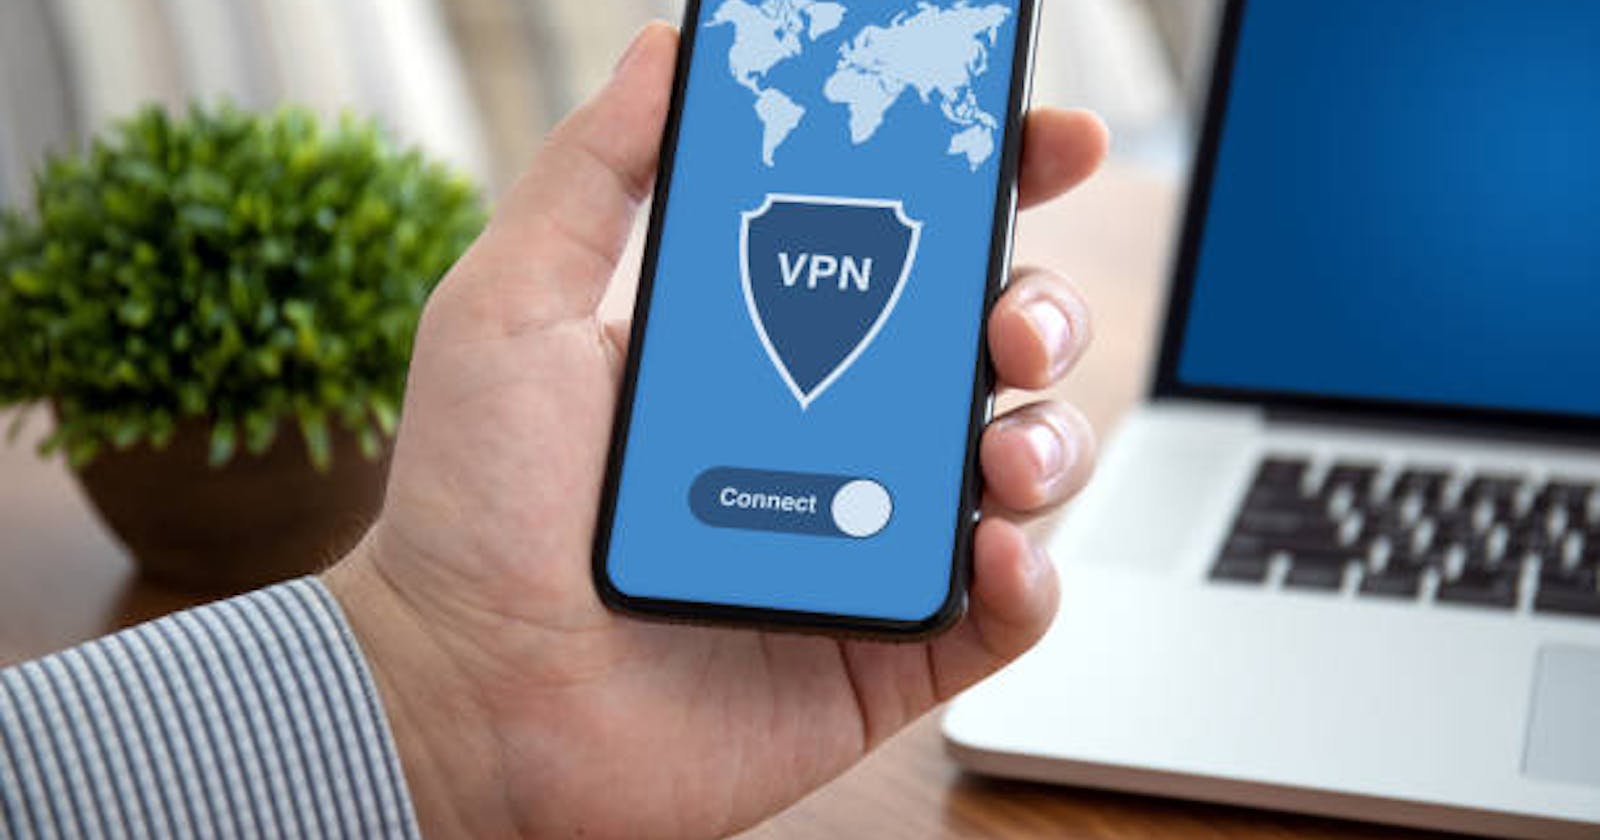 The Best Alternative For A Free VPN 
-Geolocation Blocking